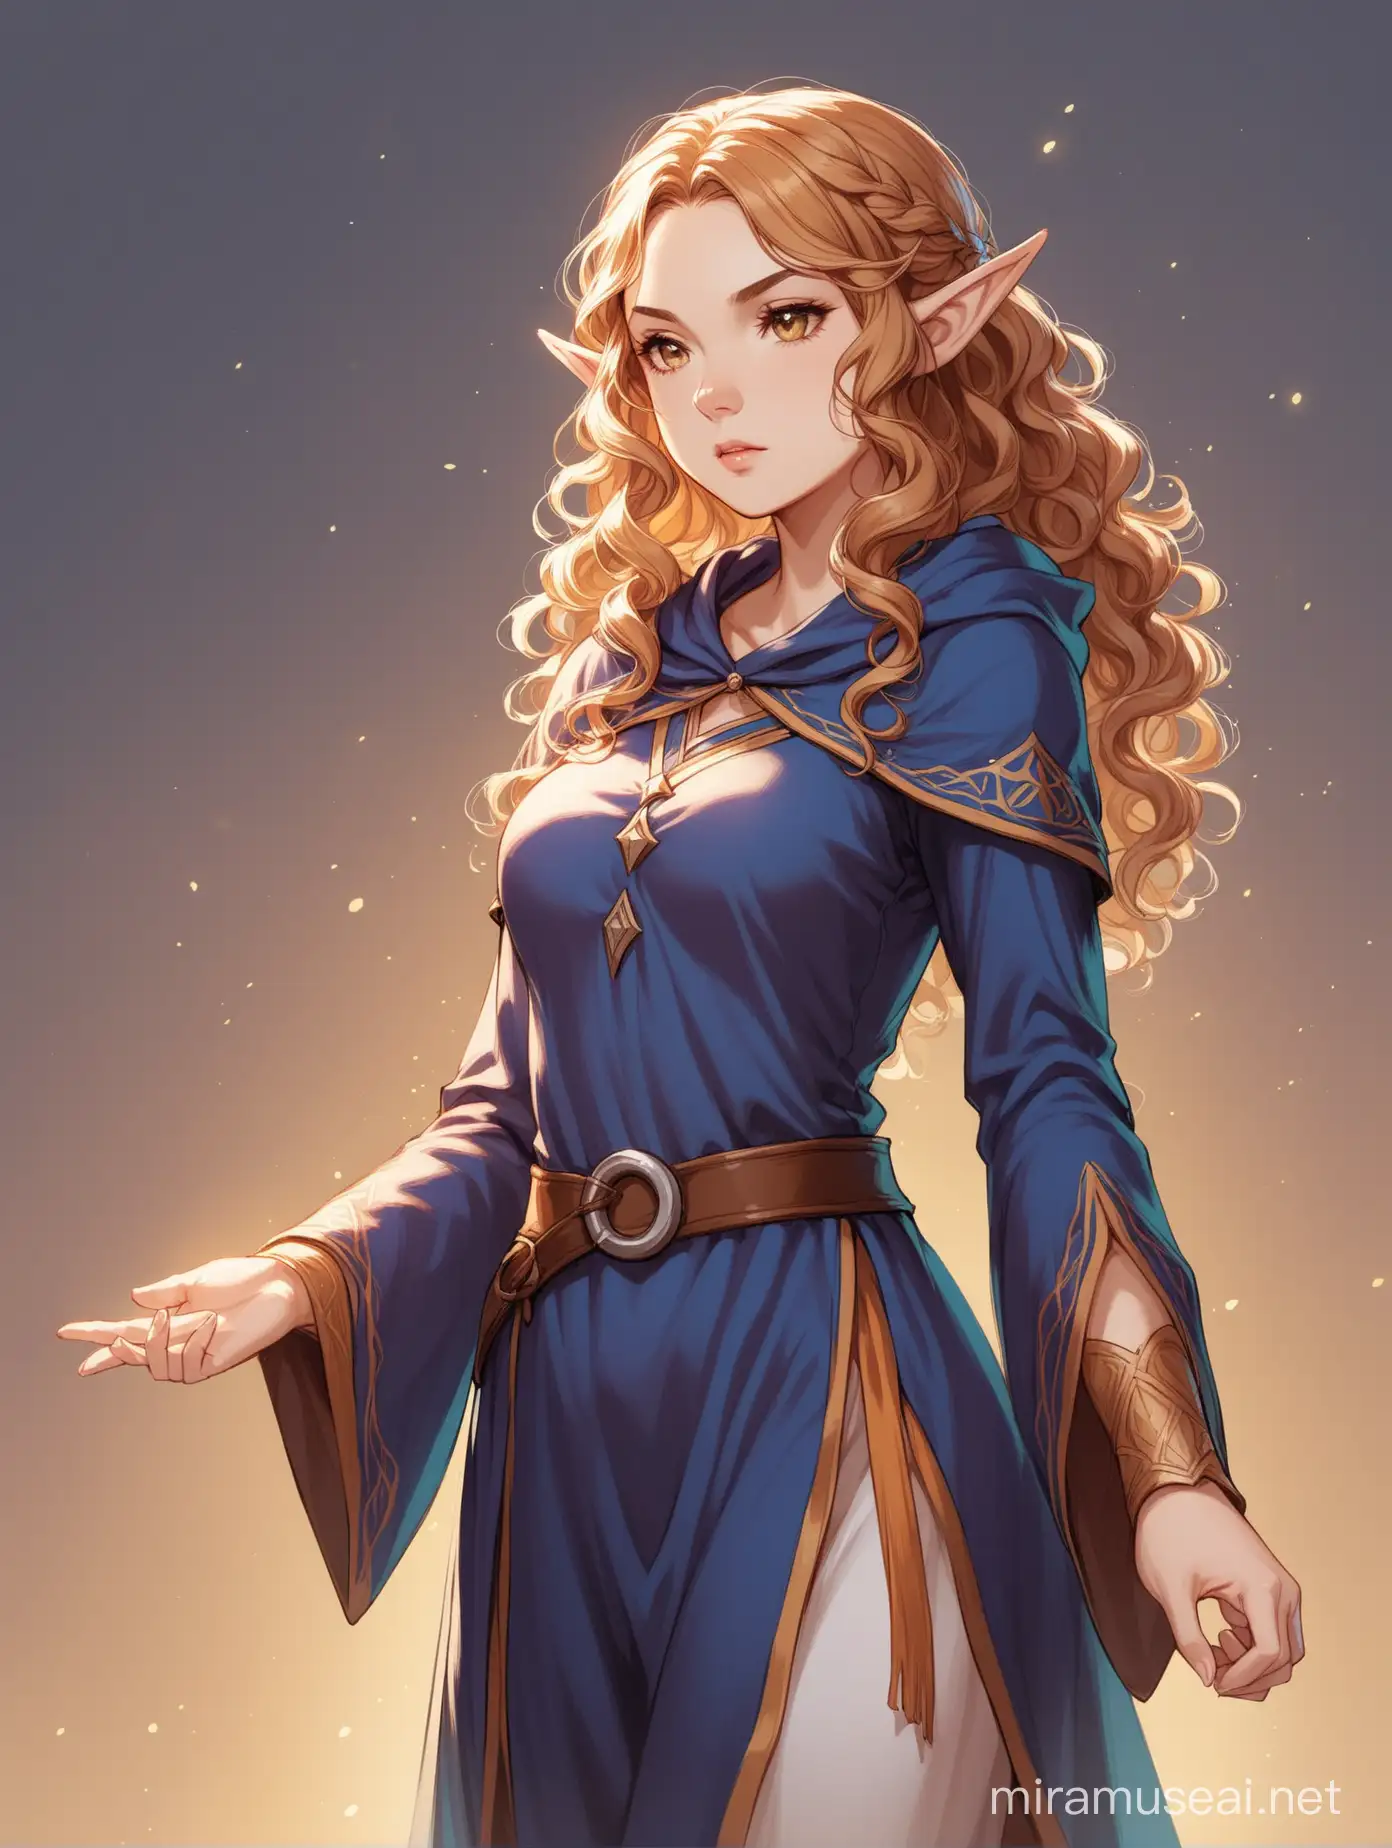 Stoic Elf Woman in Mage Outfit with Curly Hair at 3 Quarter Angle